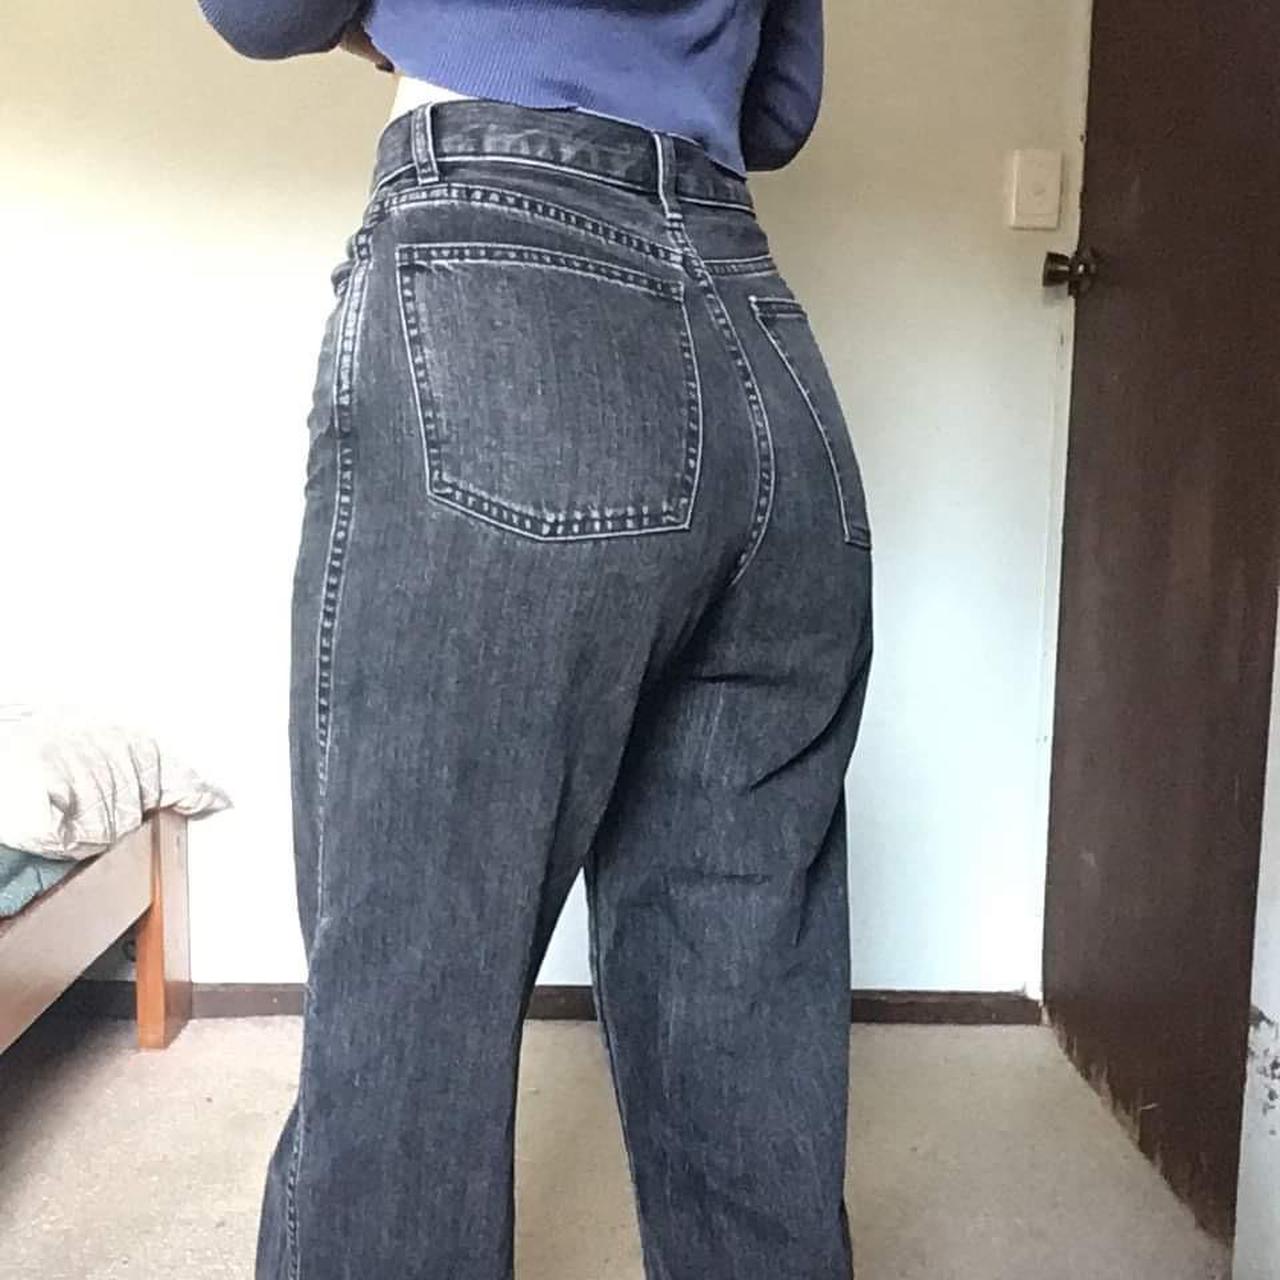 Baggy high wasted uniqlo jeans. Sick thick denim in... - Depop